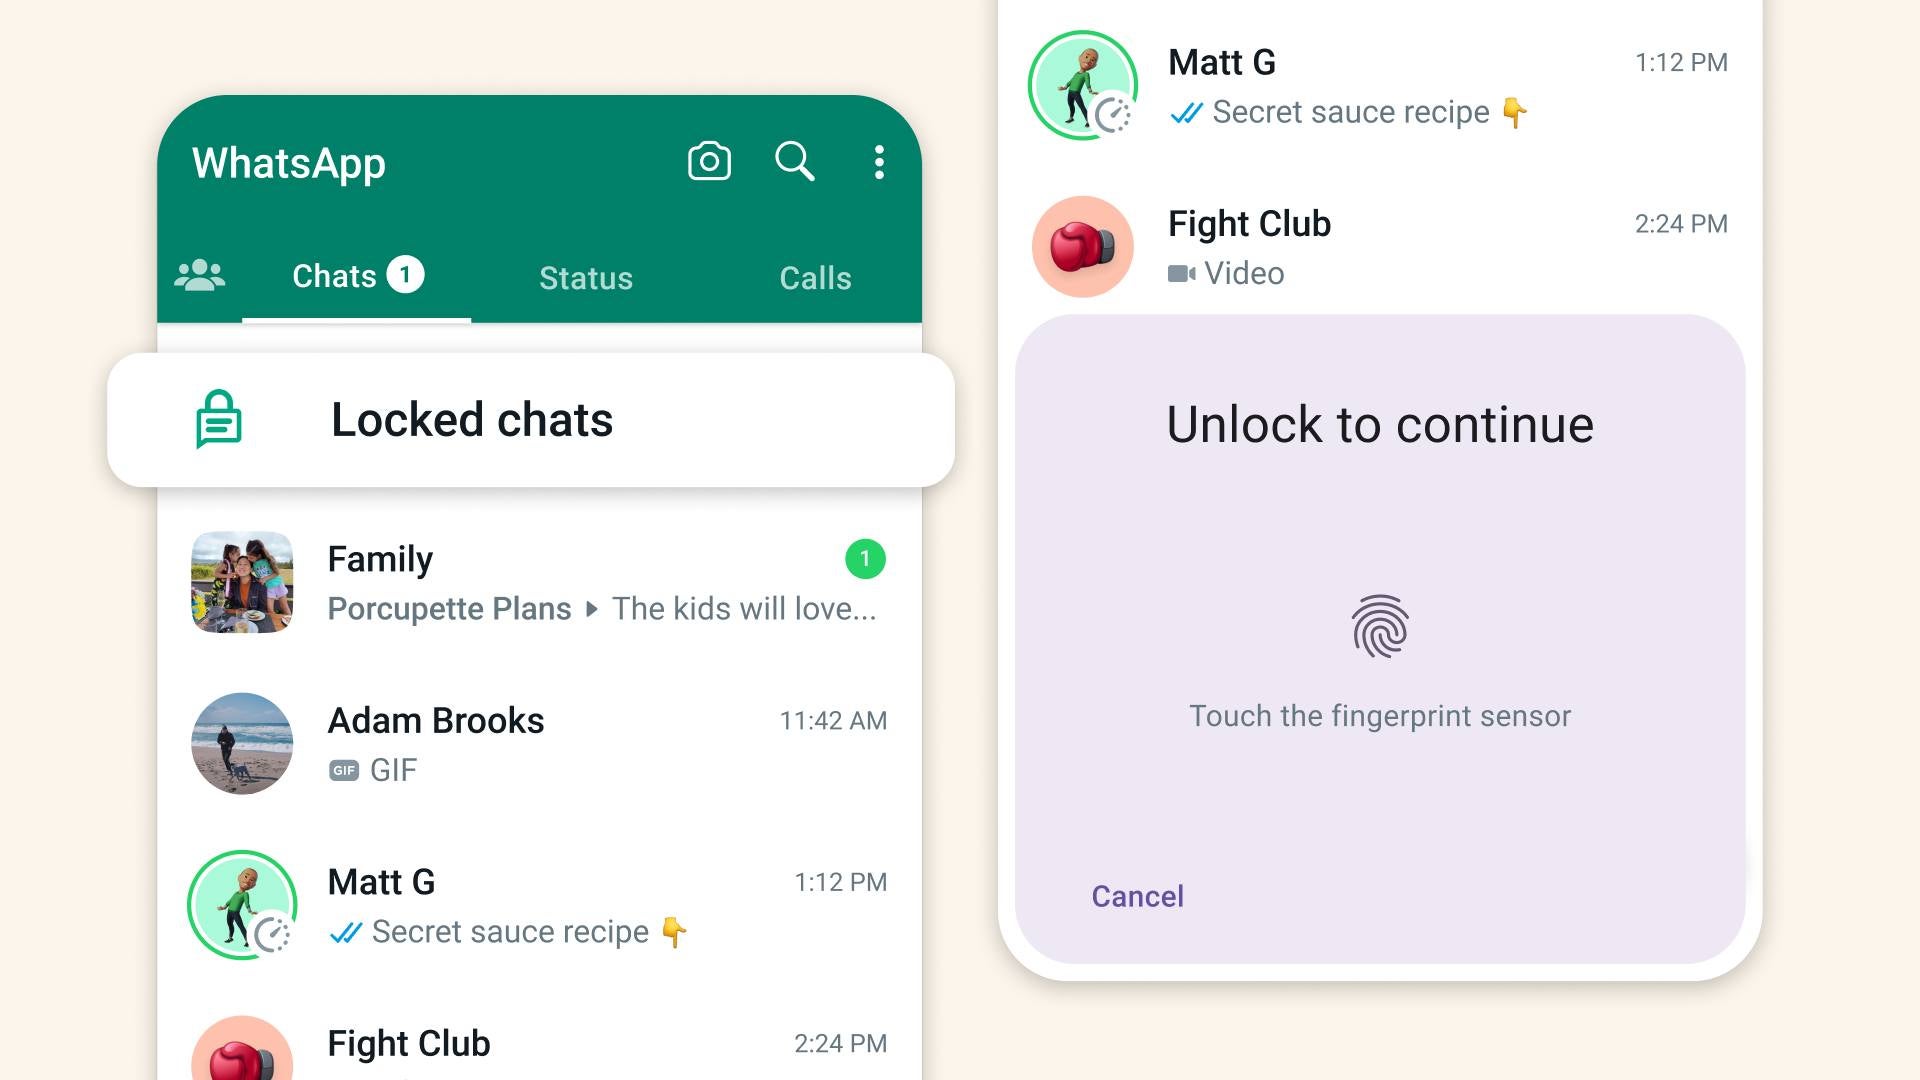 Meta CEO Mark Zuckerberg shared a screenshot of what the new Locked Chats WhatsApp feature will look like